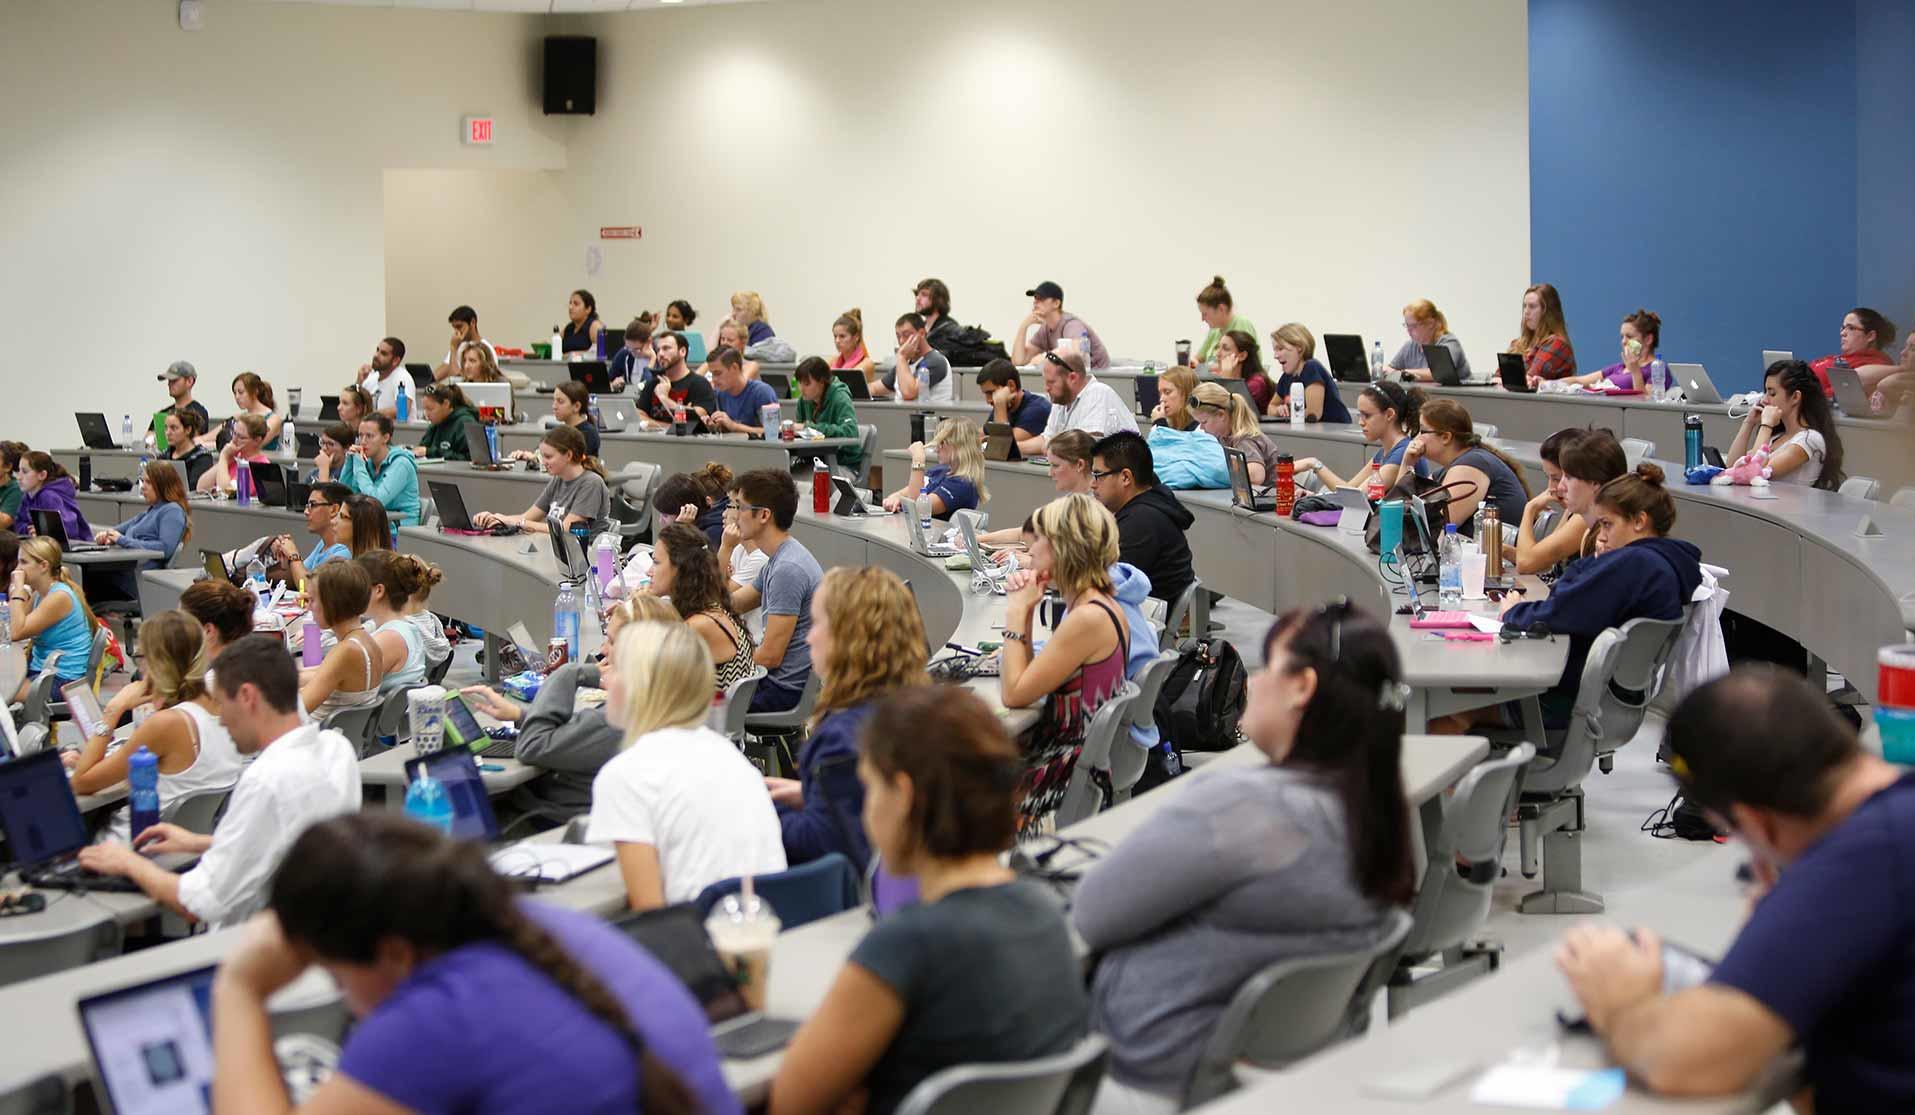 Students listening to a lecture in a large auditorium classroom